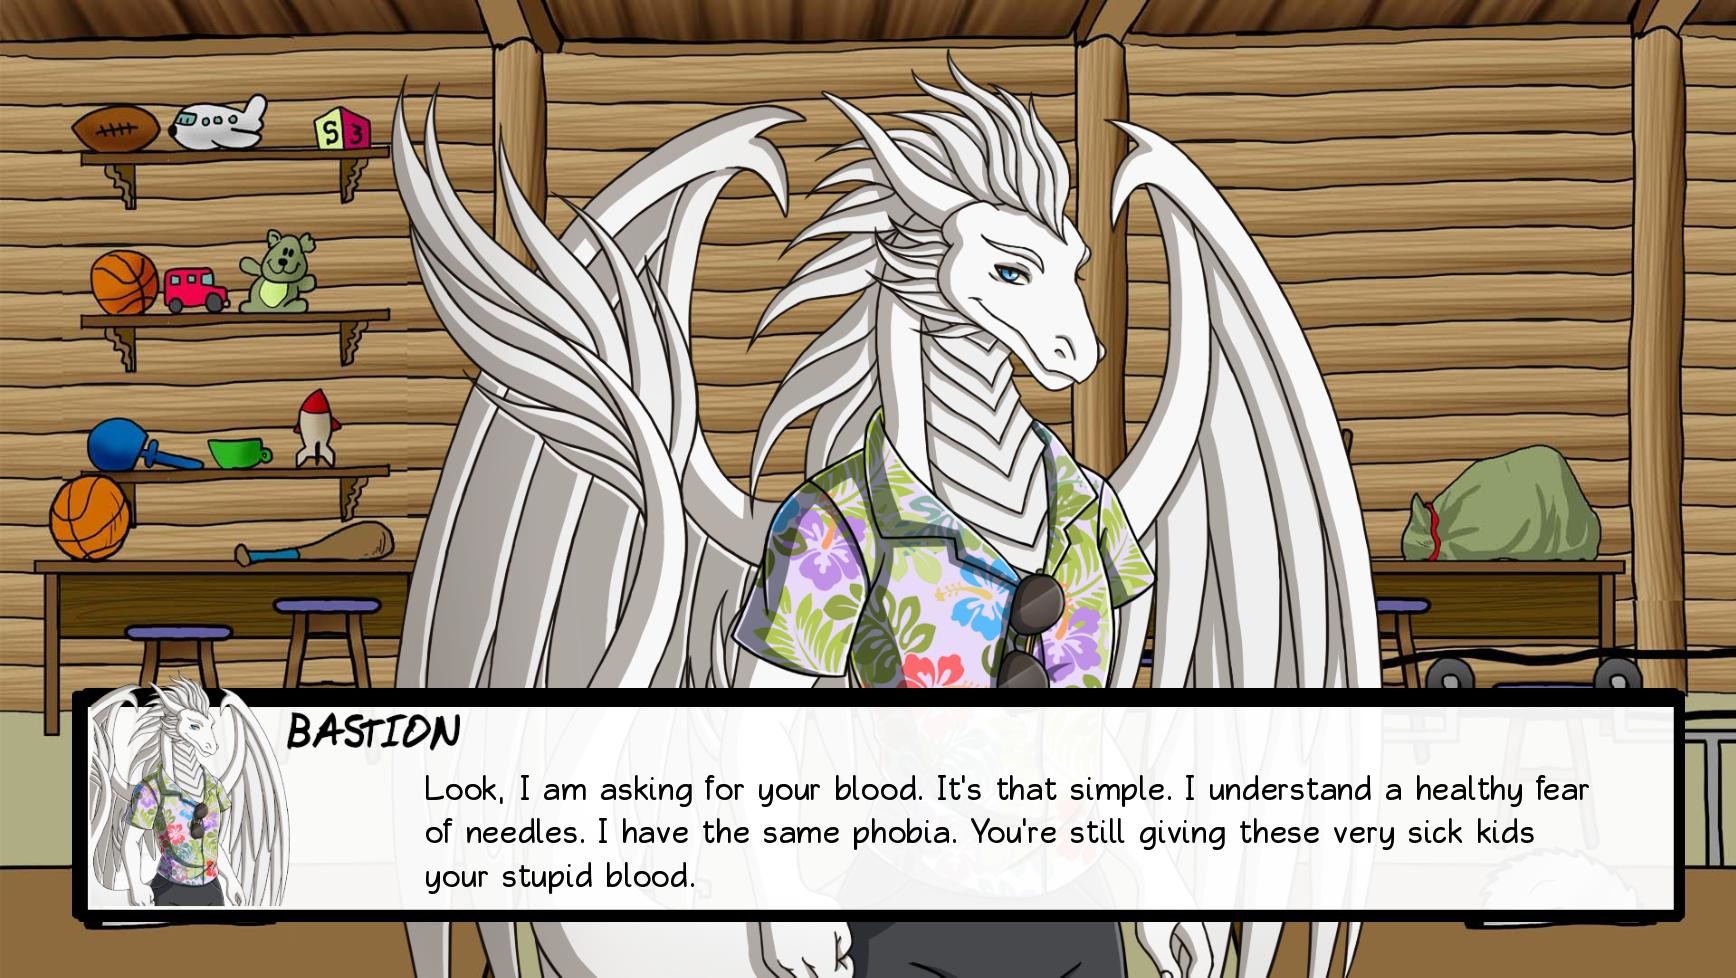 Furry Shakespeare: Dashing Dinosaurs & Sexy Centaurs: Winter's Tale: Donation Station Featured Screenshot #1